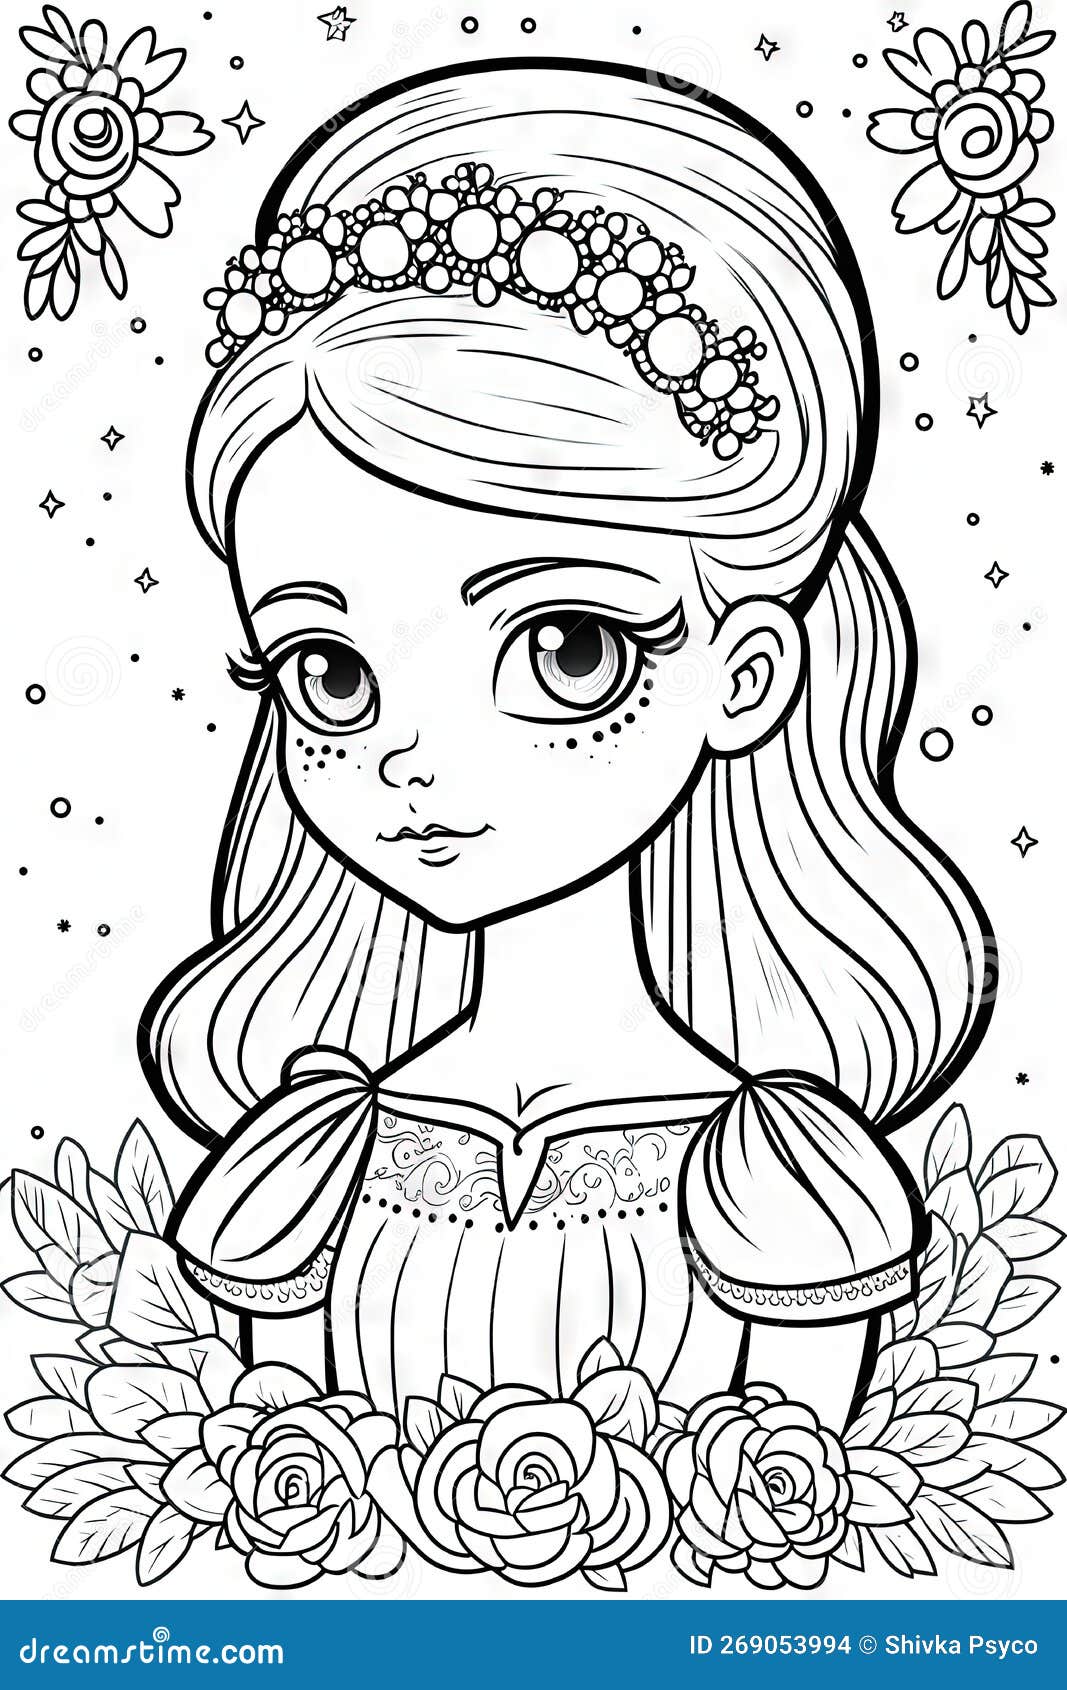 Princess coloring page for adults simple cute generative art stock illustration